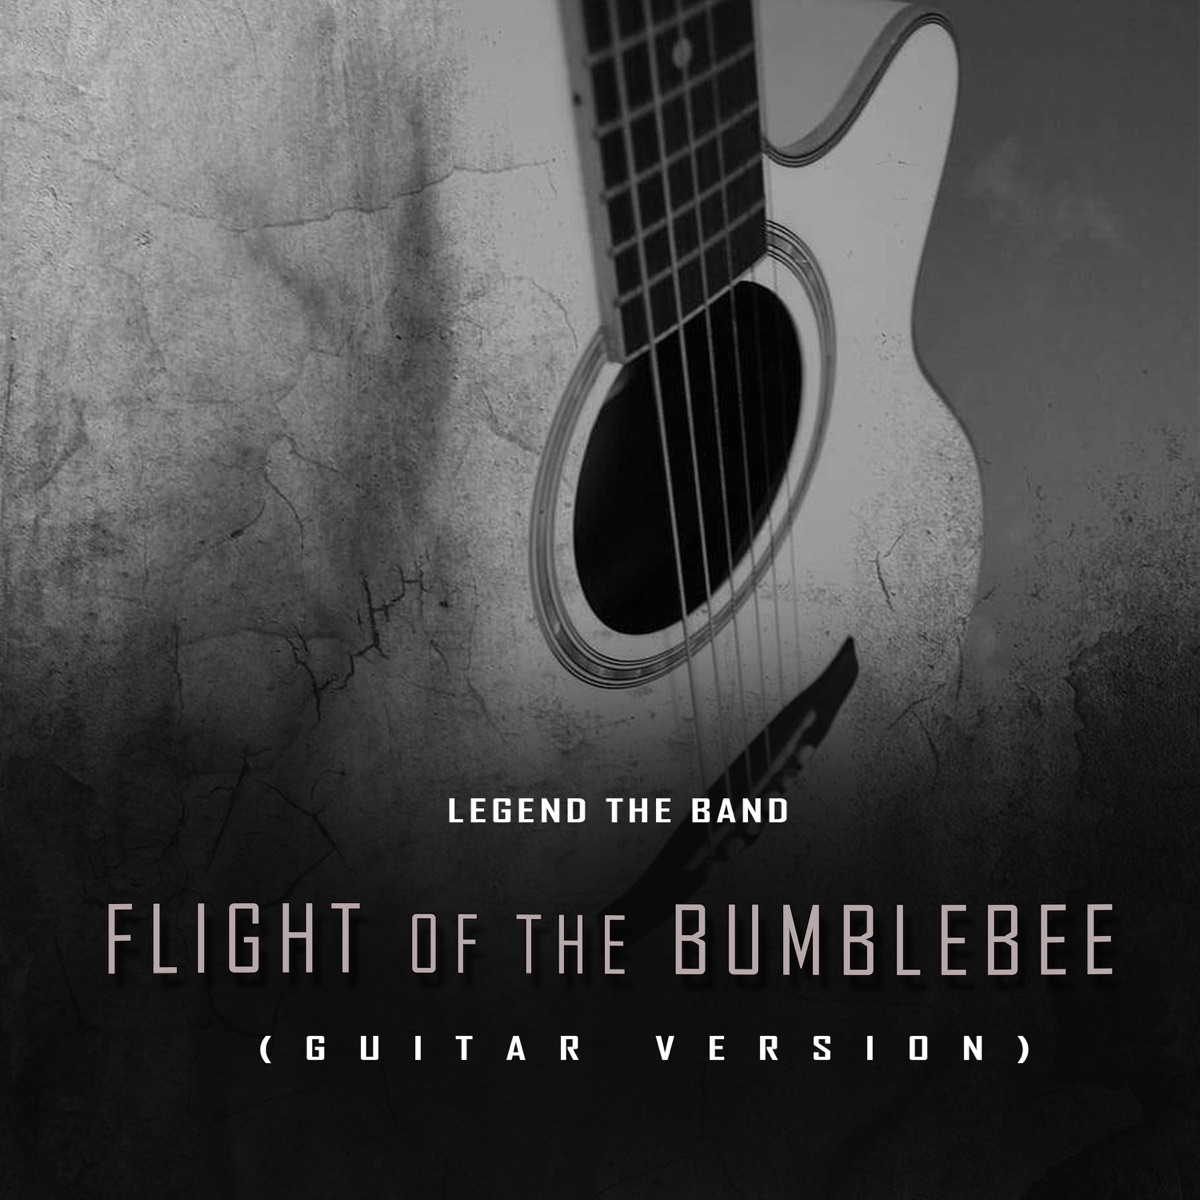 Flight of the Bumblebee (Guitar Version) - Album by Legend the Band - Apple  Music